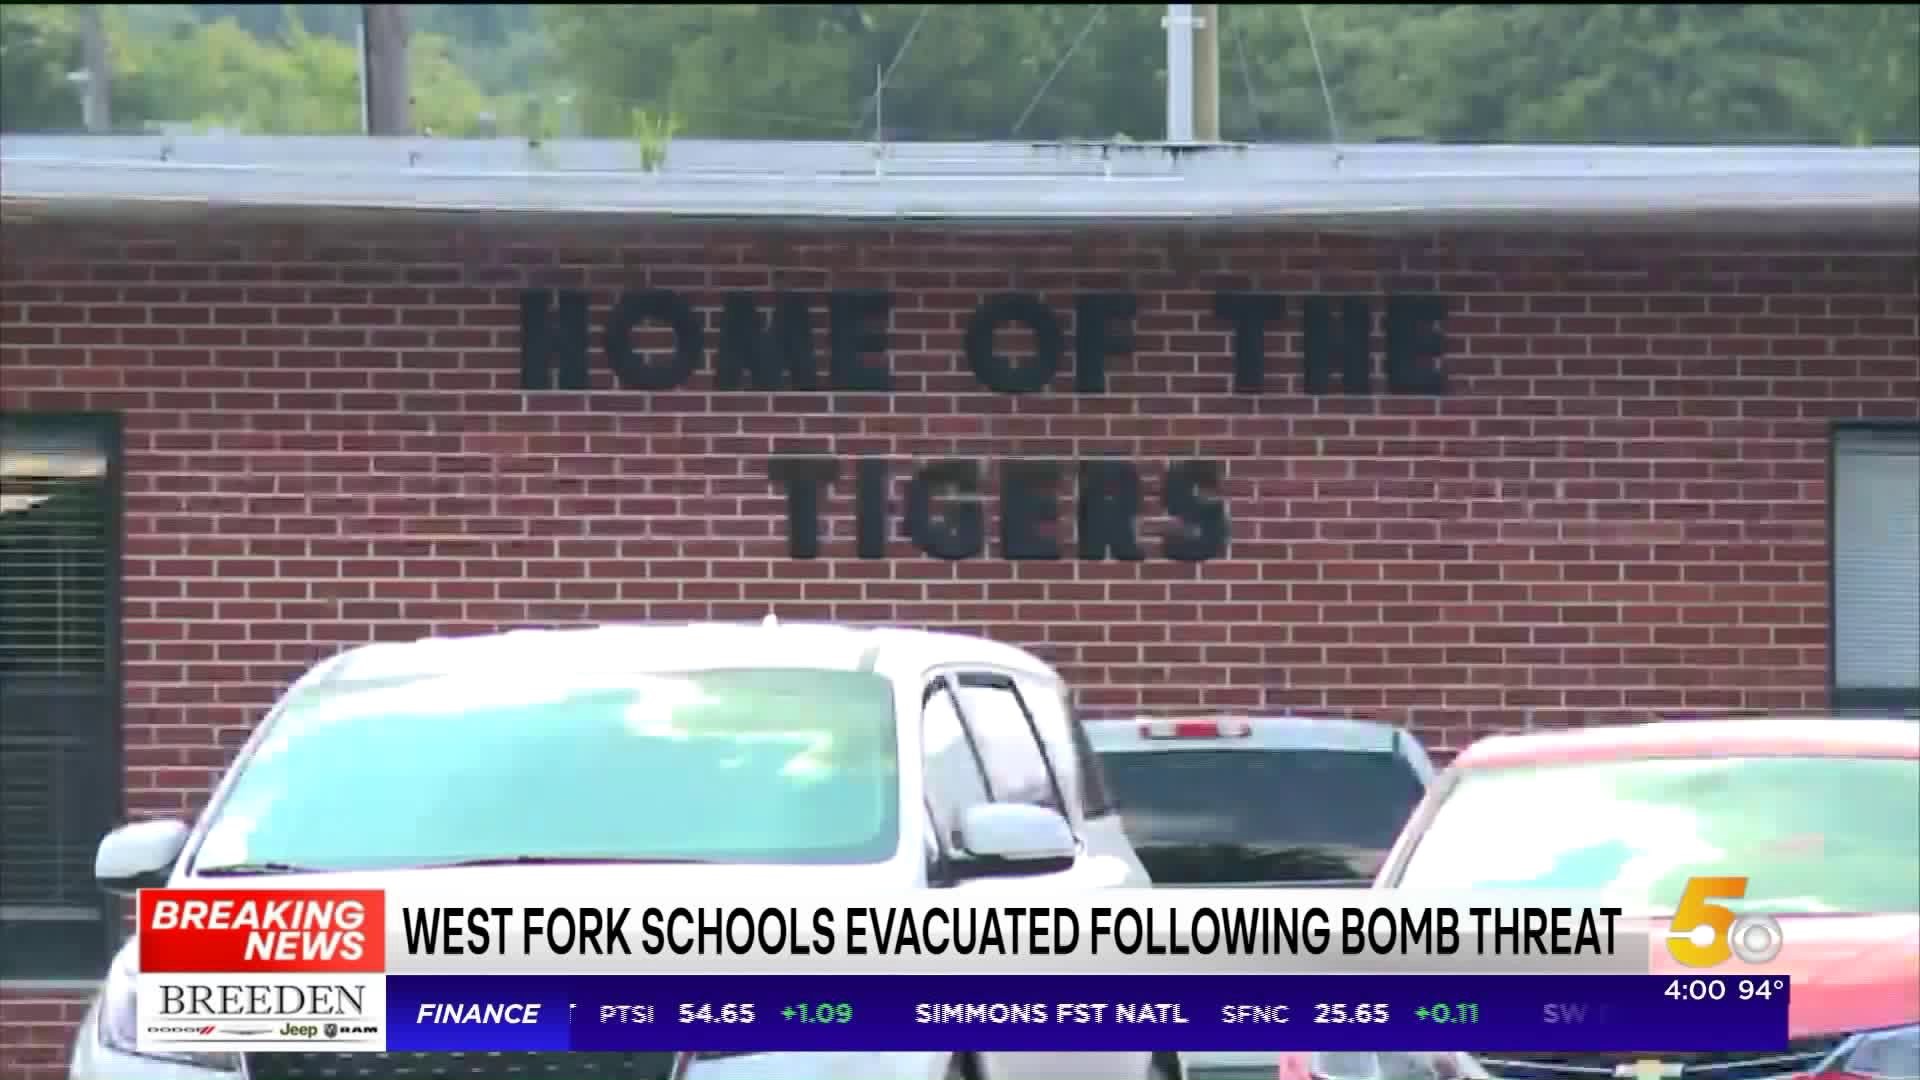 West Fork Schools Evacuated After Bomb Threat